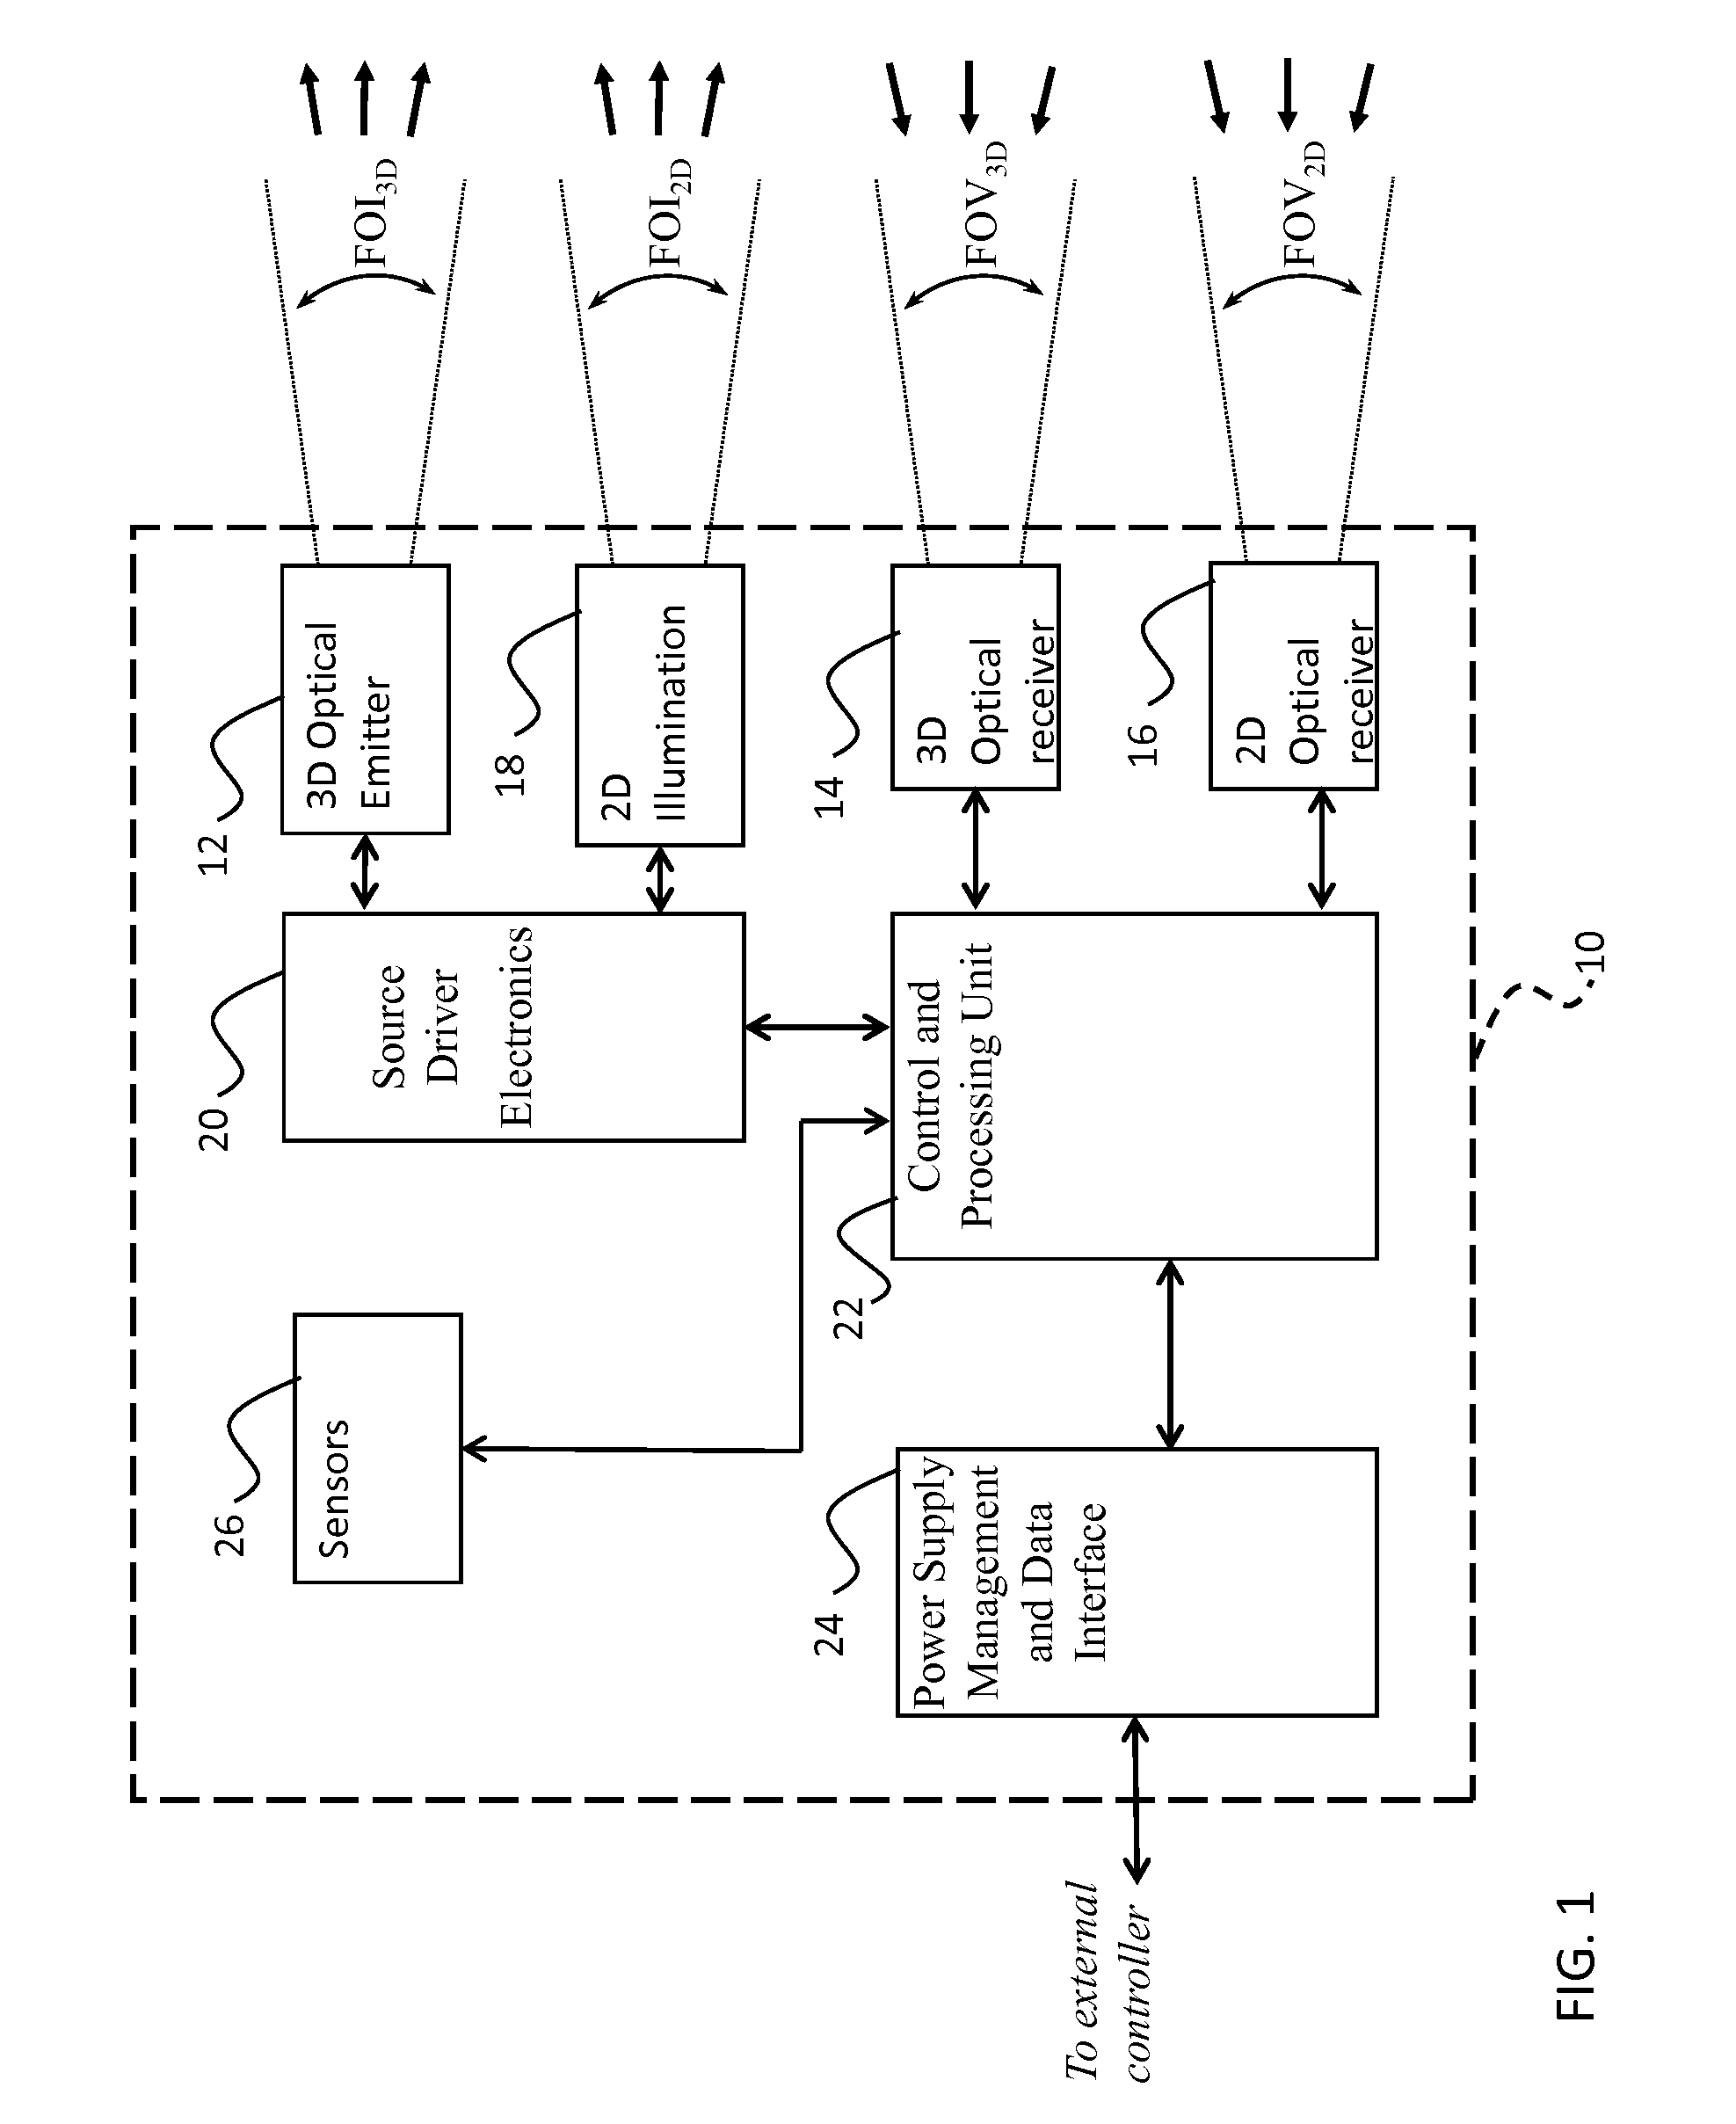 System and method for multipurpose traffic detection and characterization